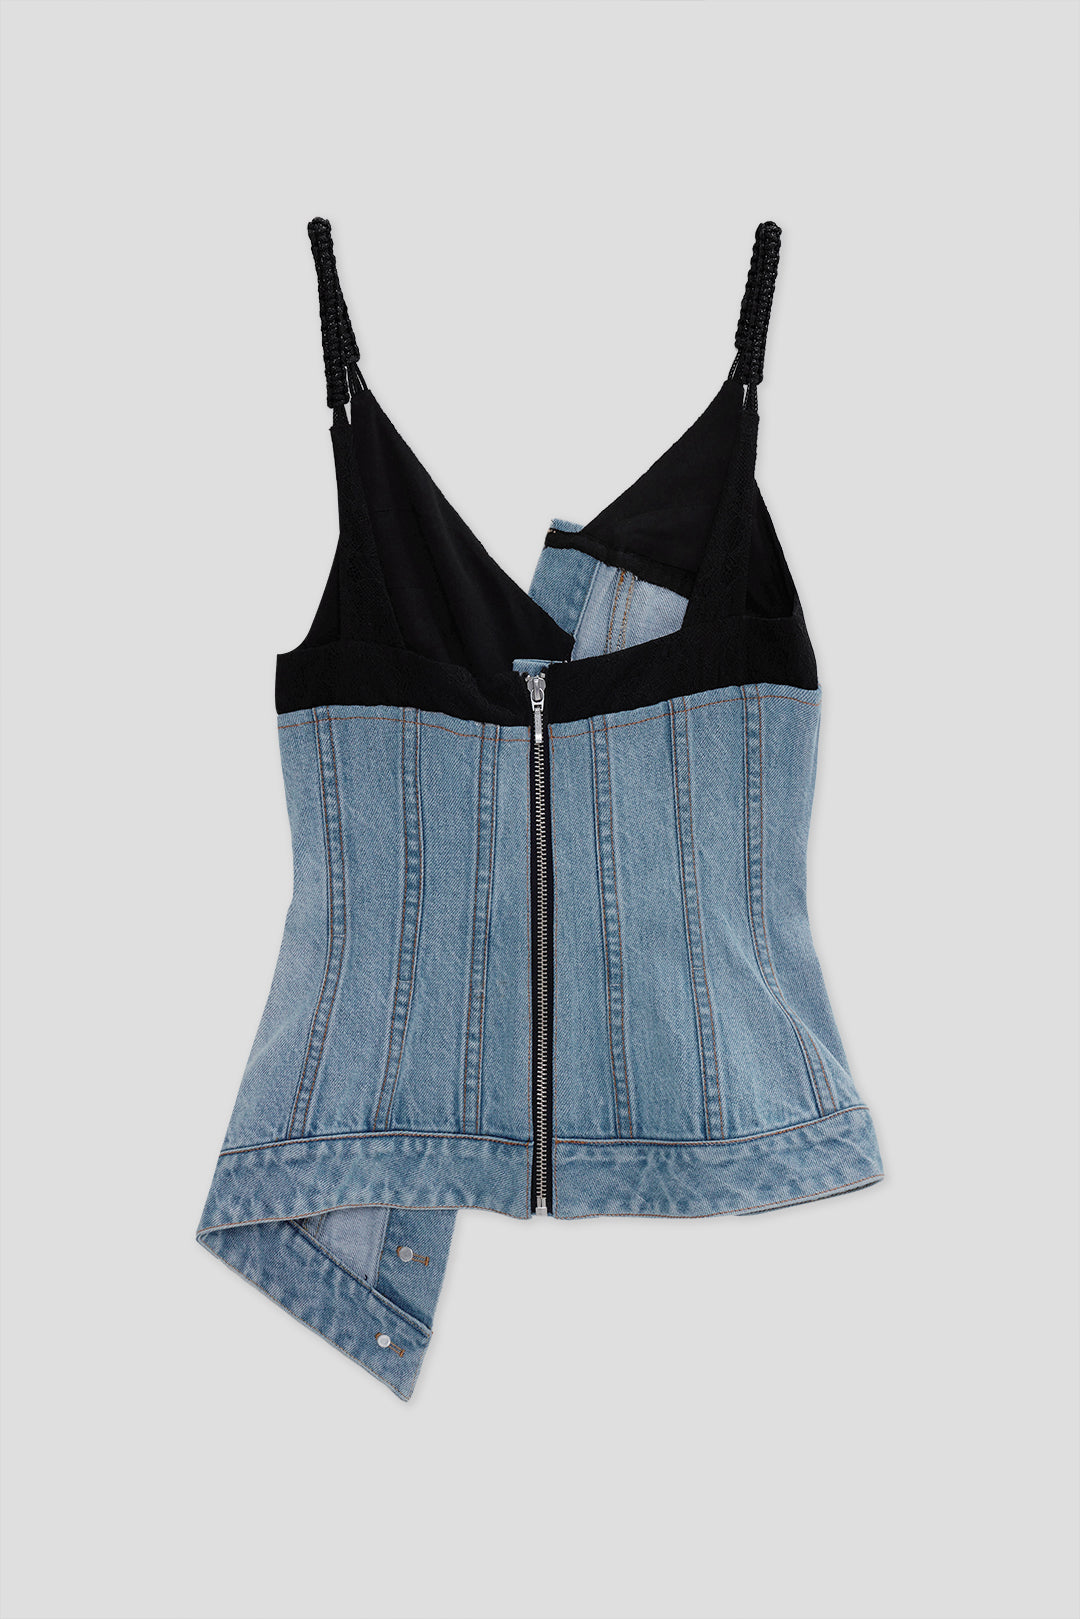 Misplaced Lace and Denim Top